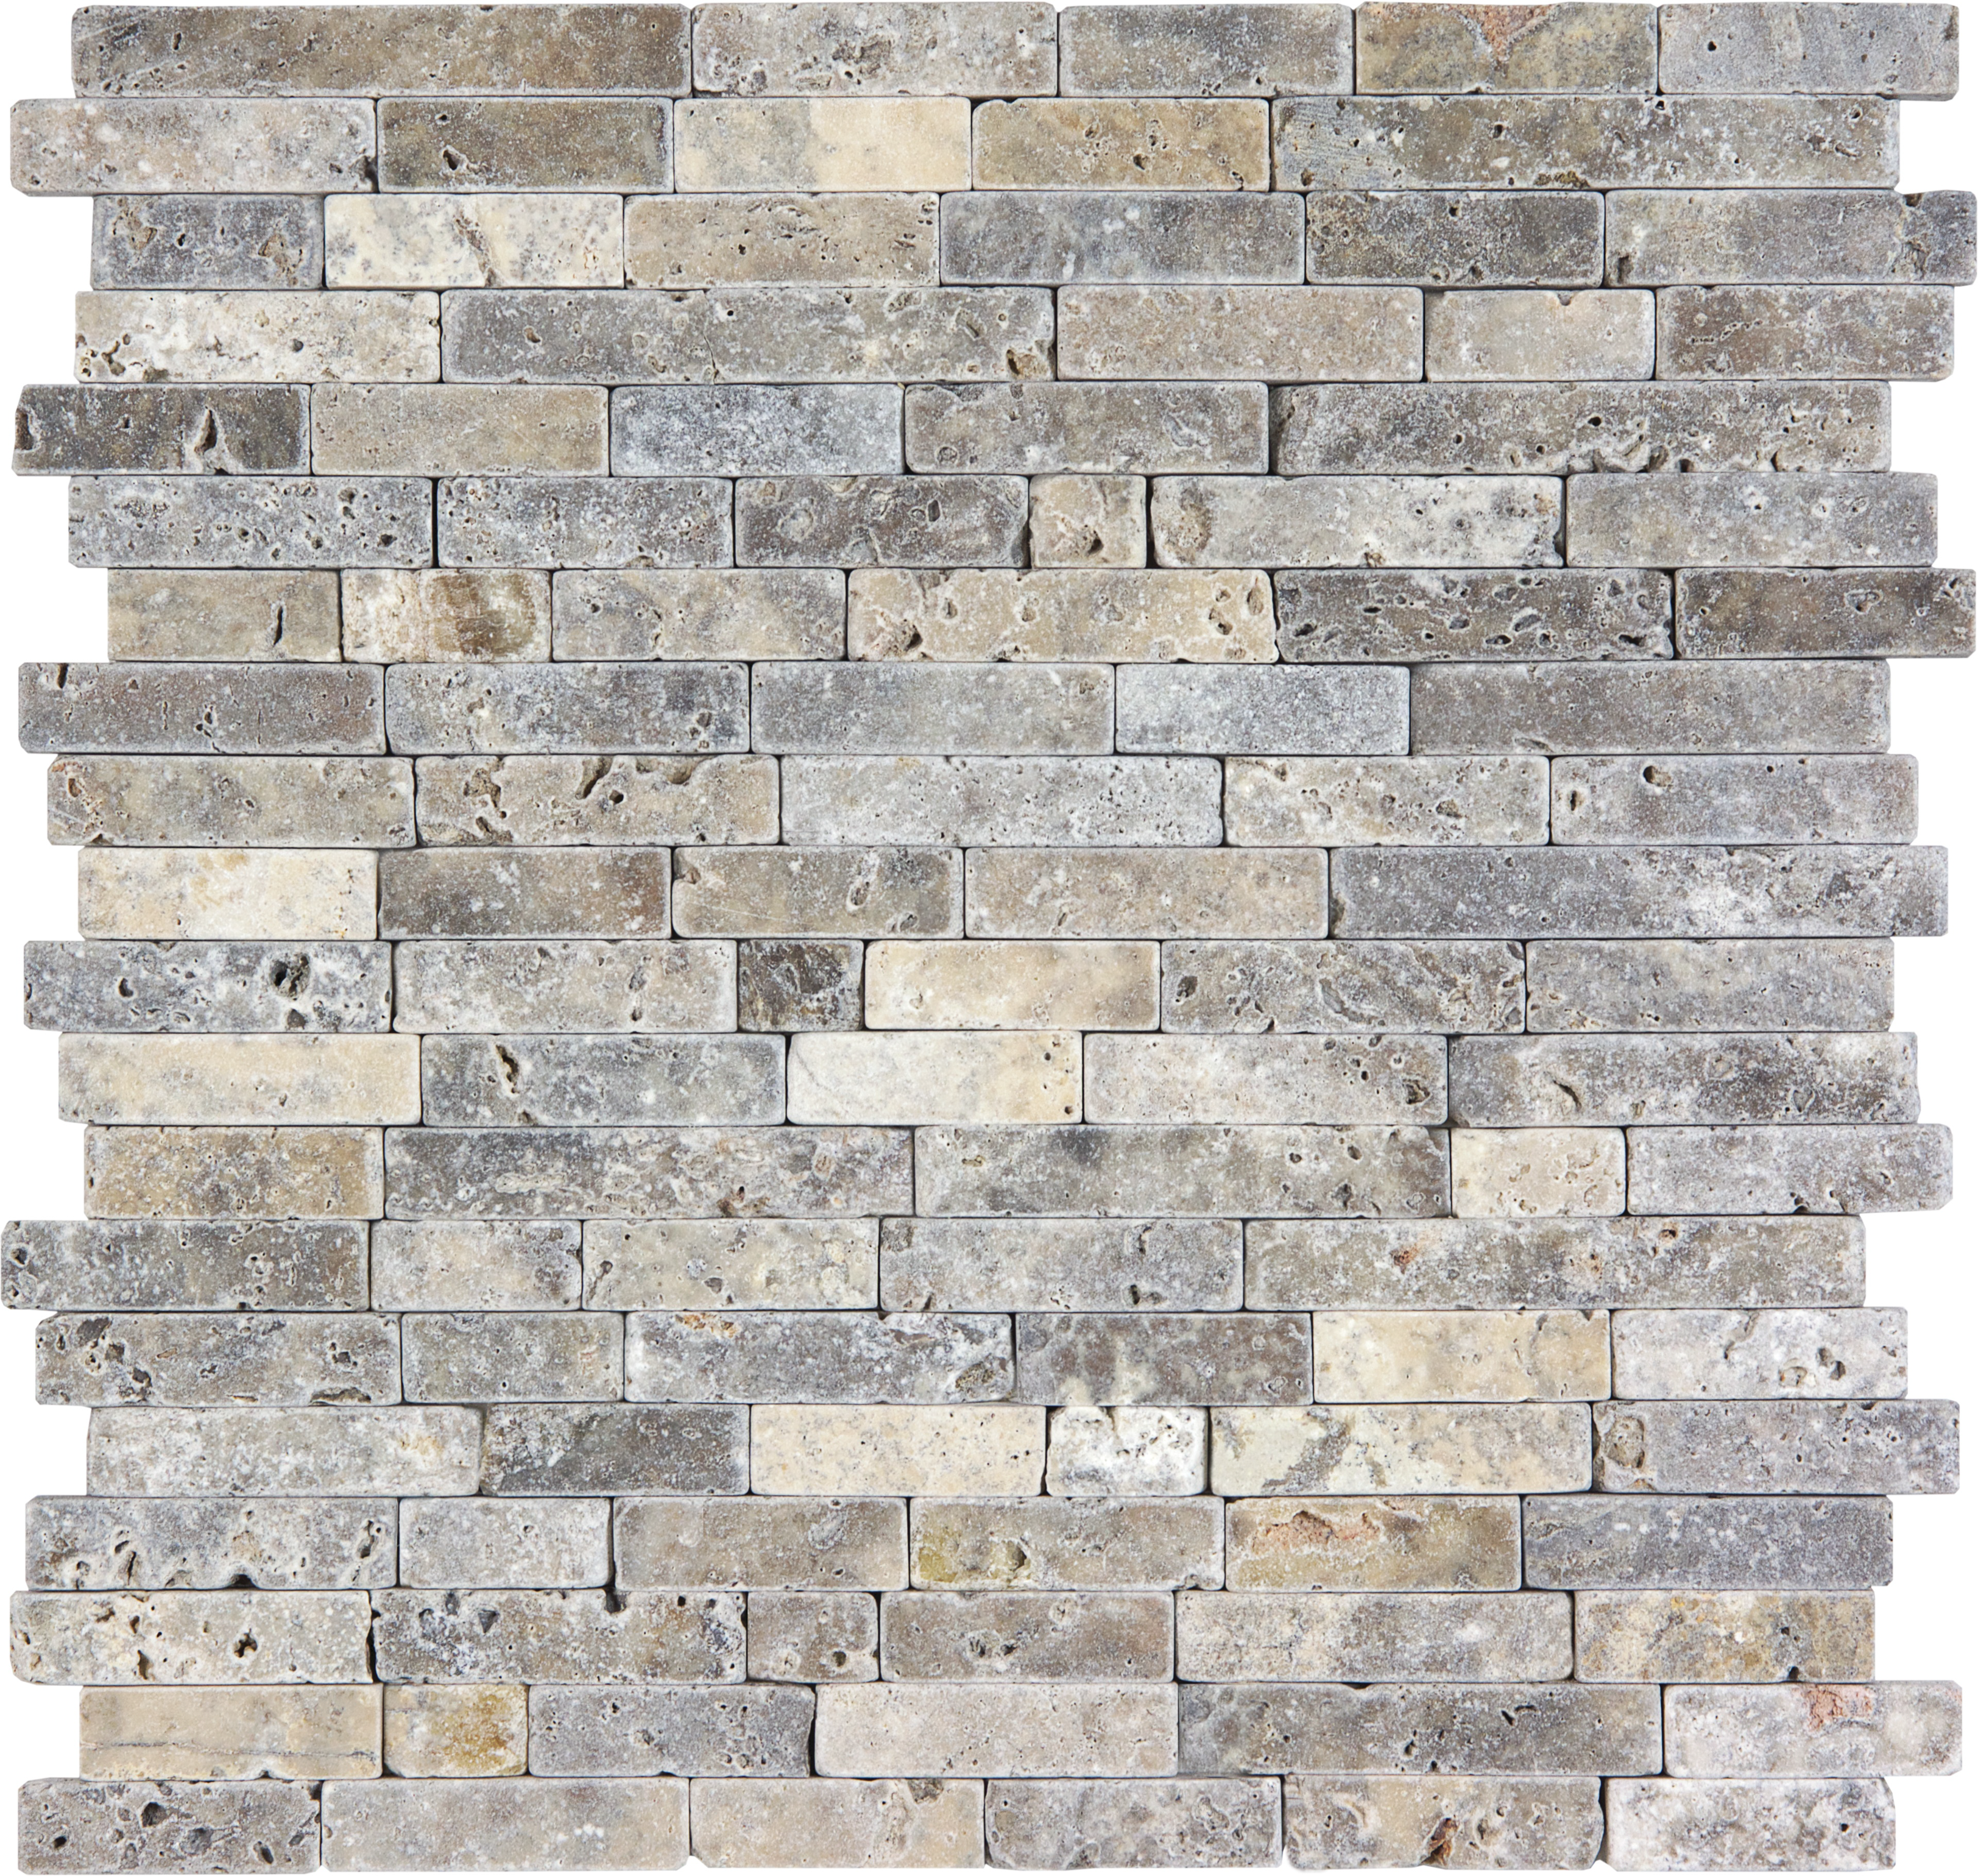 travertine random strip pattern natural stone mosaic from silver ash anatolia collection distributed by surface group international tumbled finish tumbled edge mesh shape